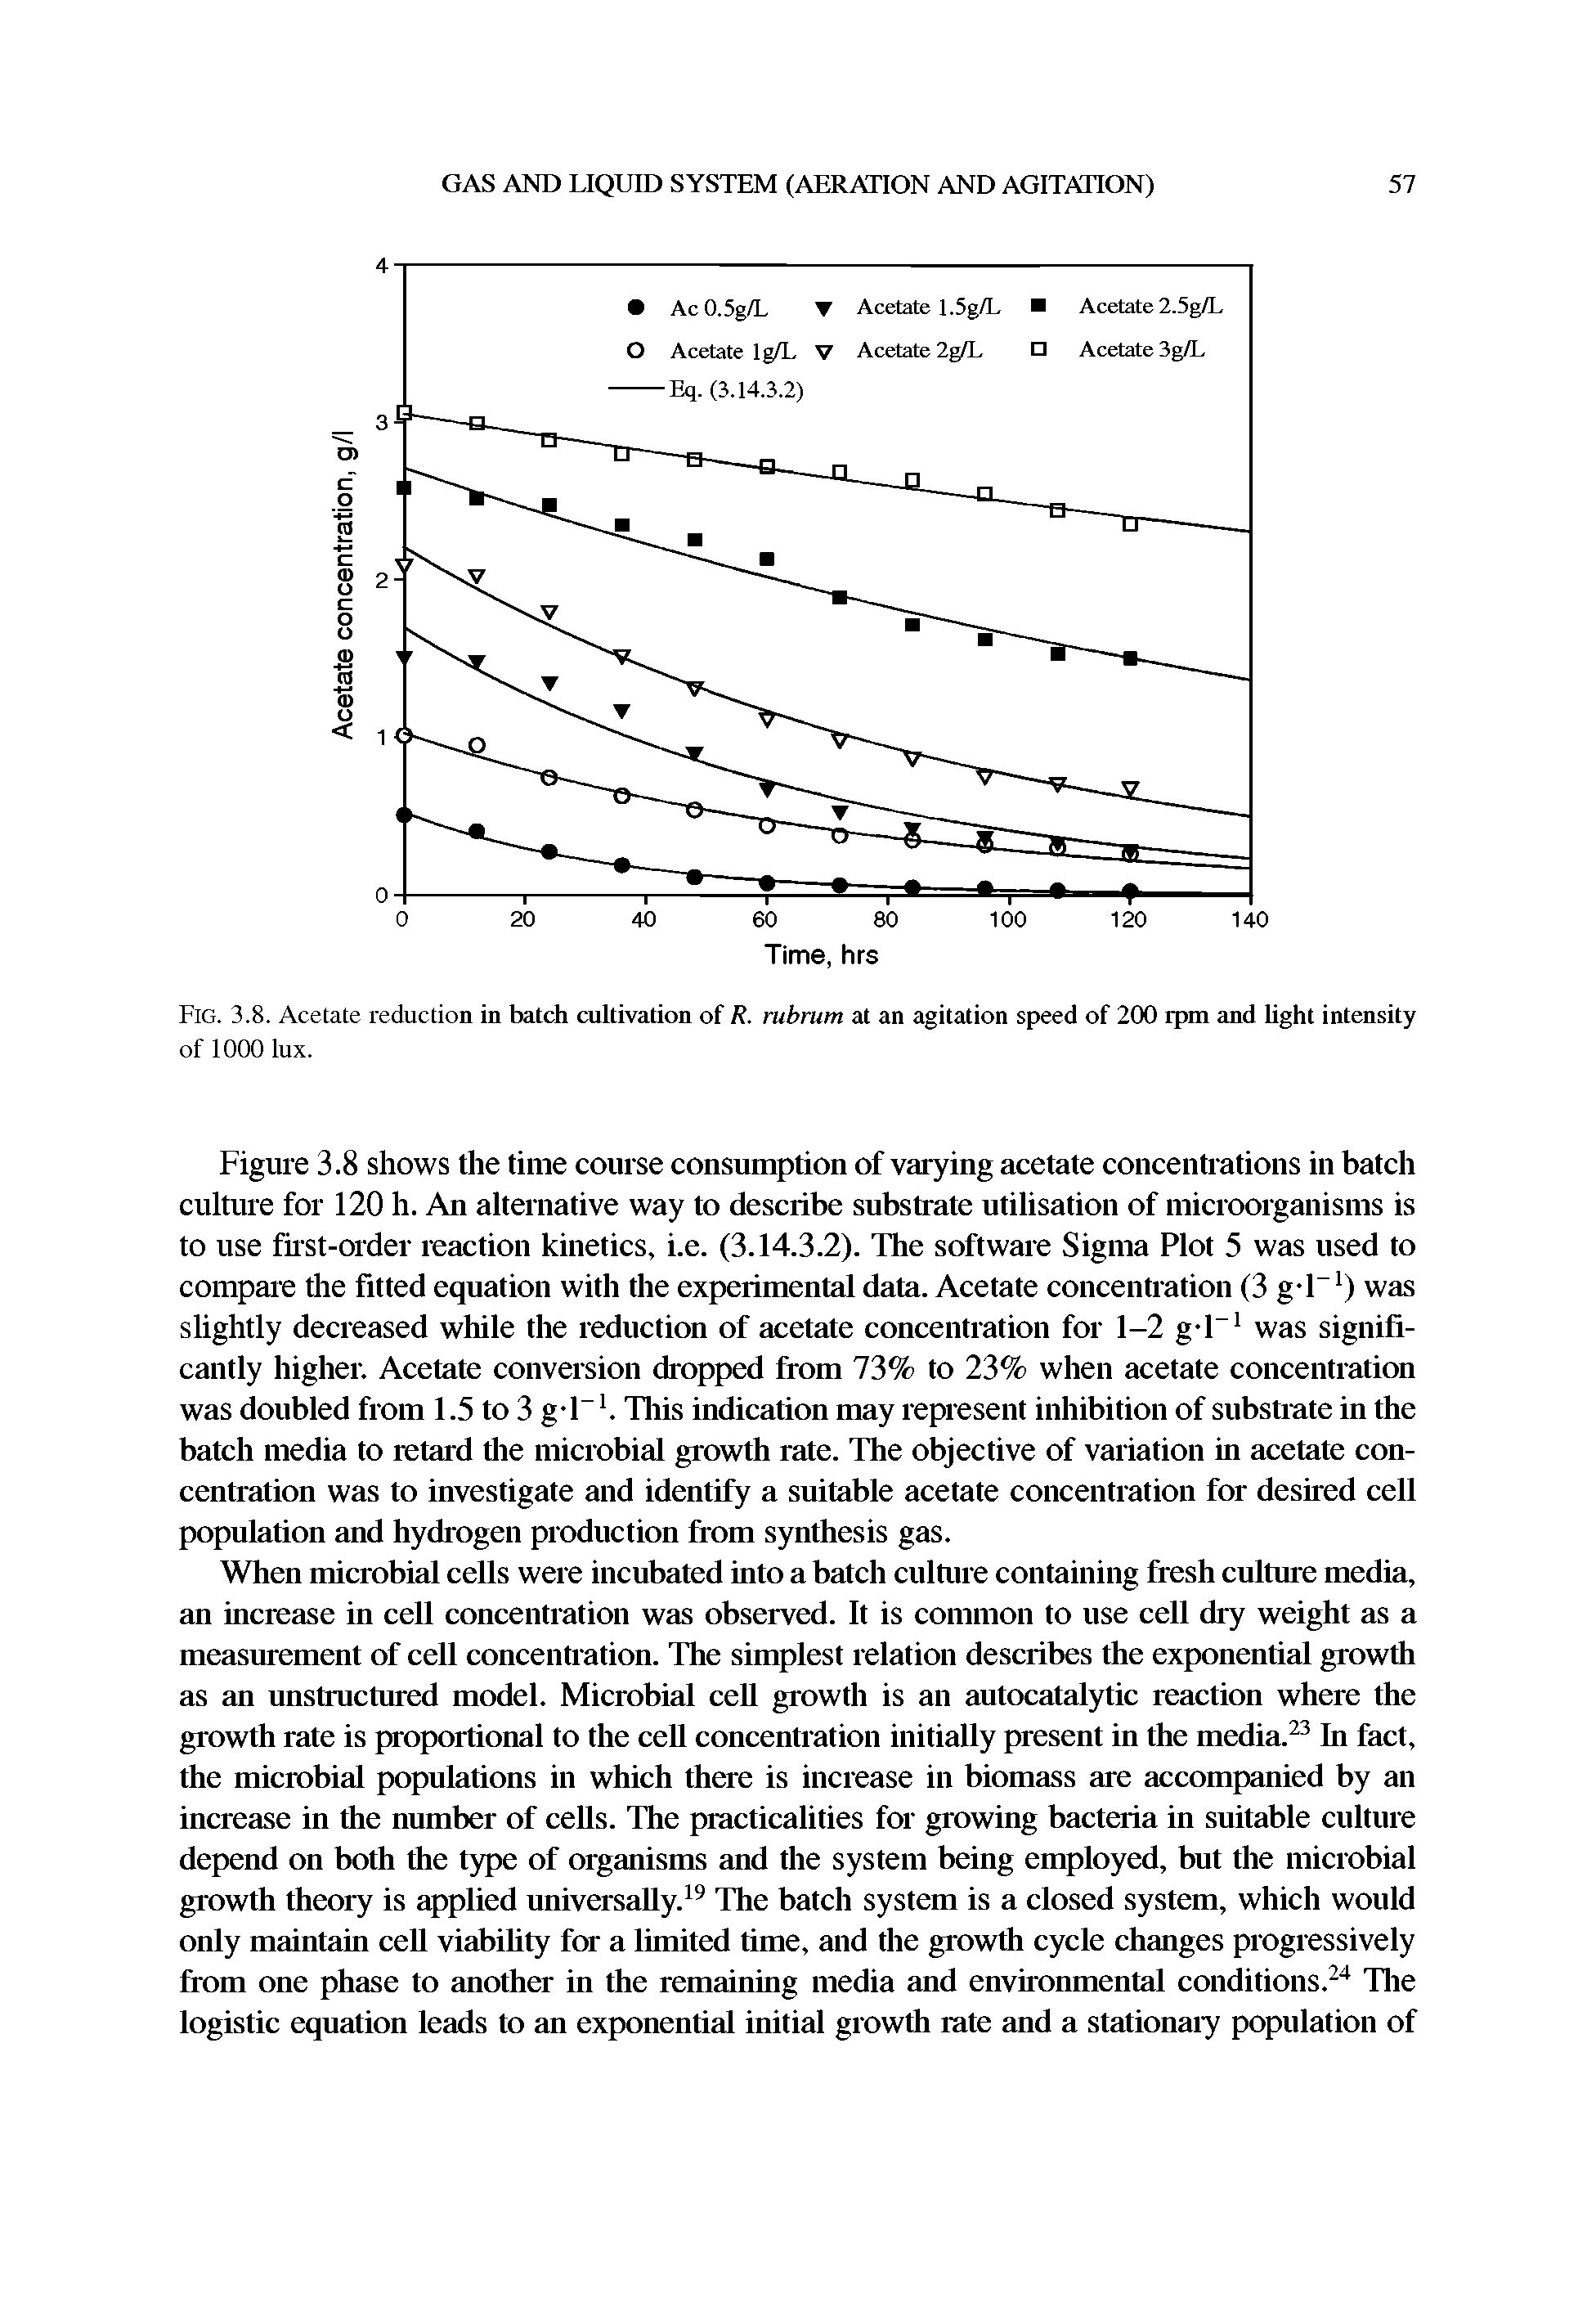 Fig. 3.8. Acetate reduction in batch cultivation of R. rubrum at an agitation speed of 200 rpm and light intensity of 1000 lux.